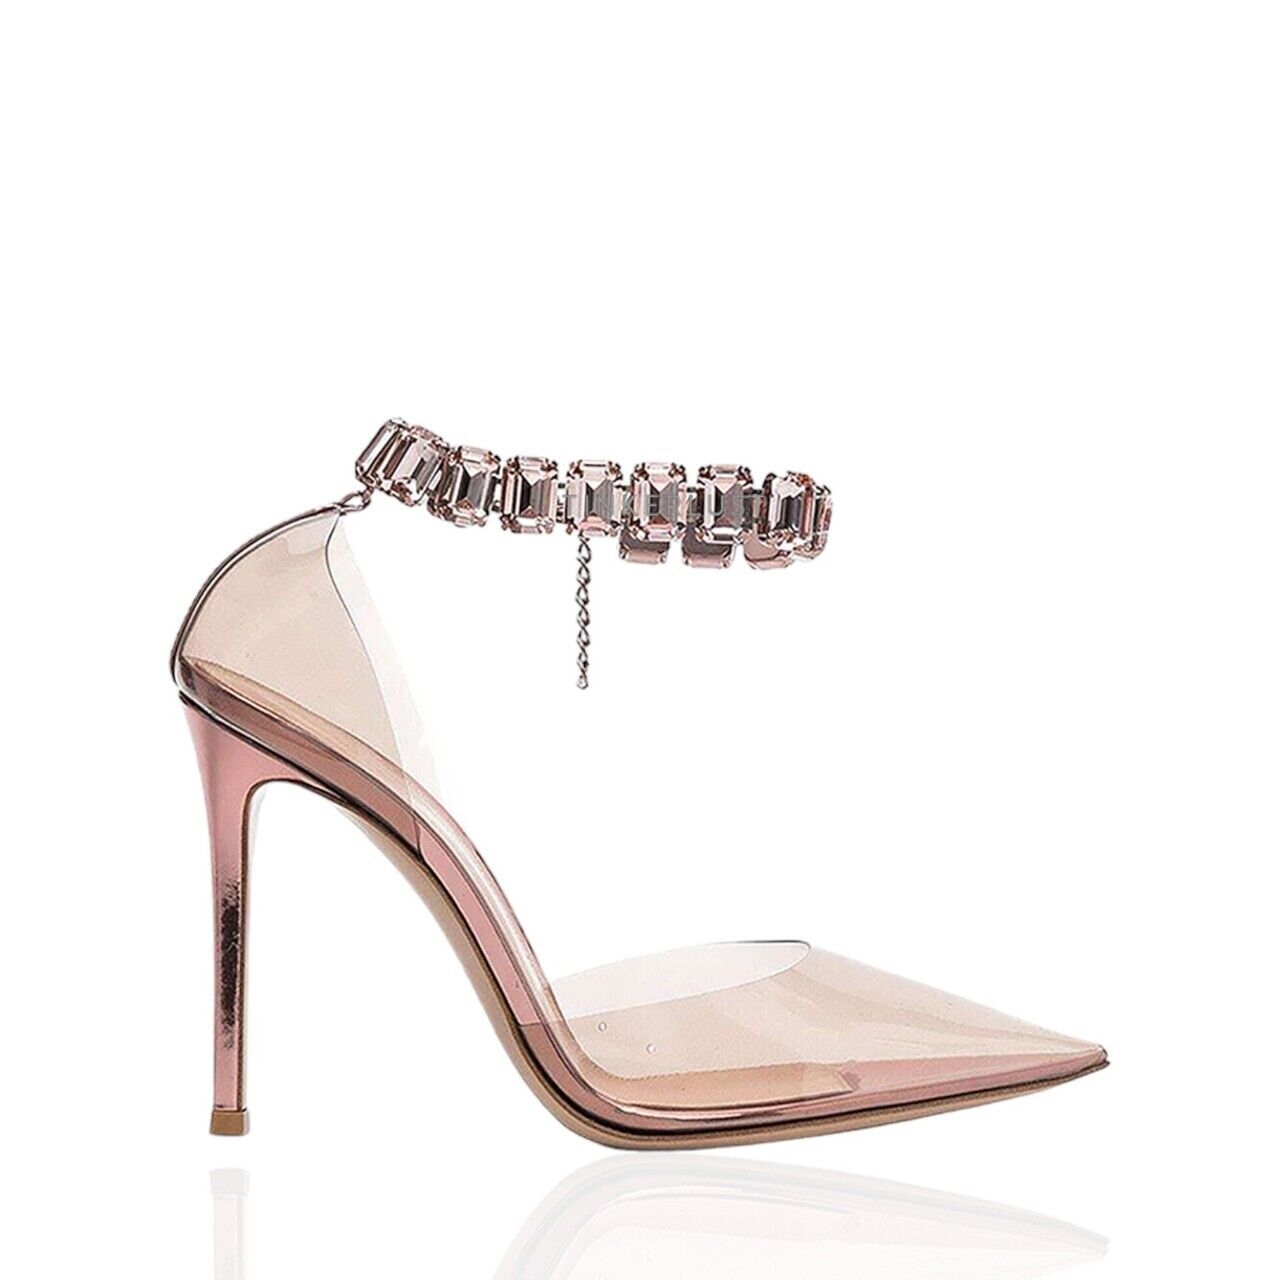 Gianvito Rossi Plexi Ankle Strap Pumps Peach with Crystals Heels